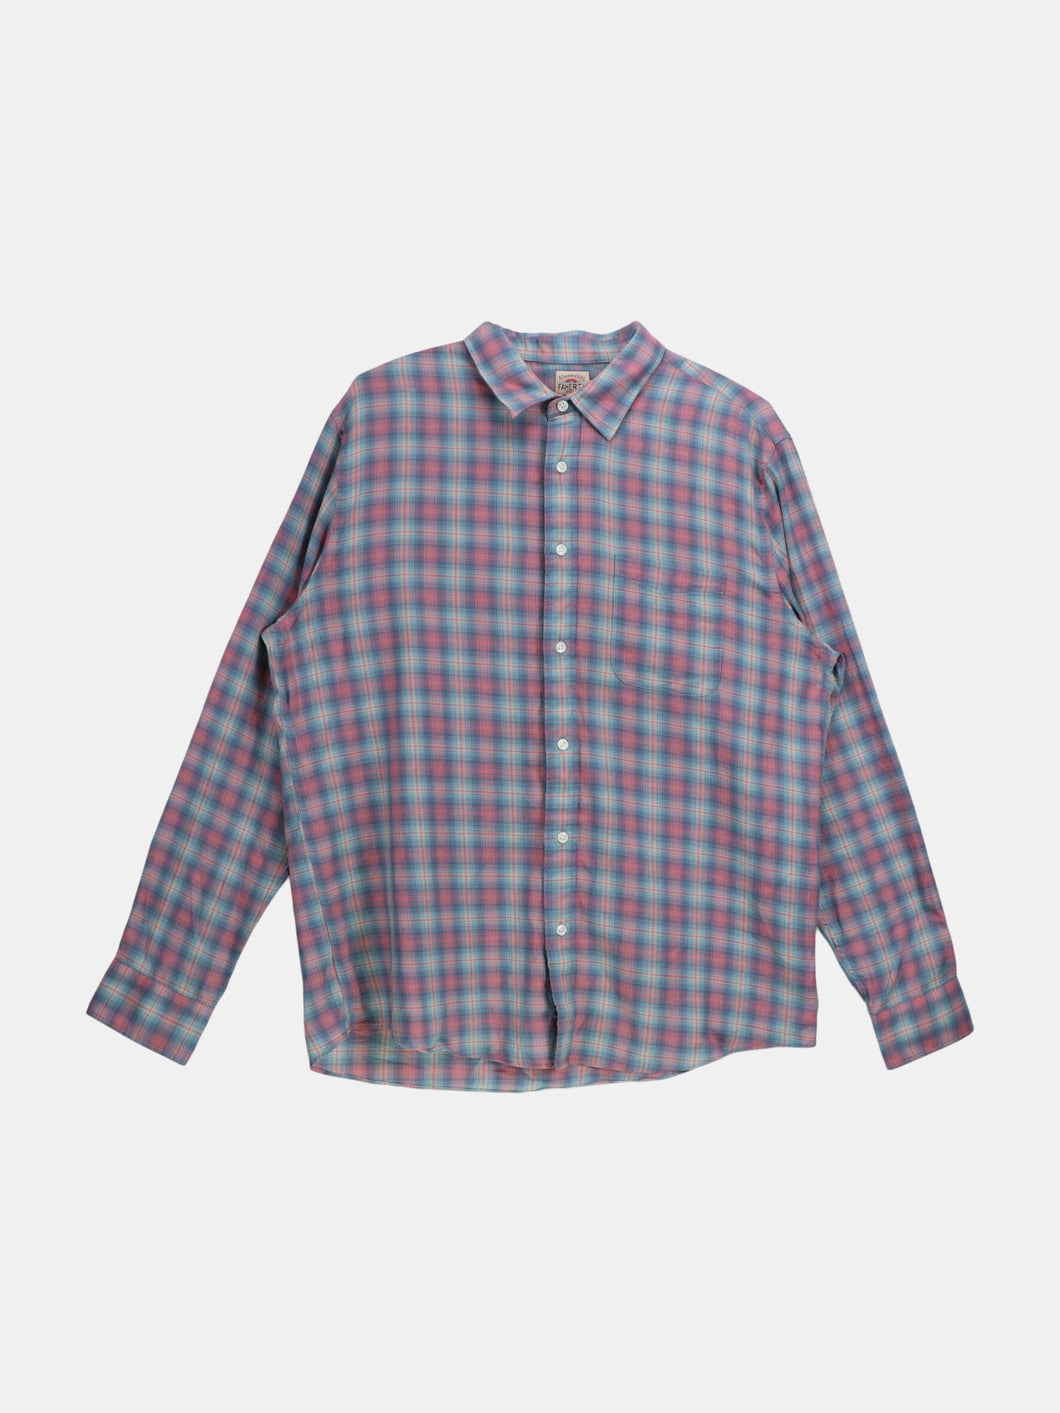 Faherty Men's Summerland Plaid Everyday Button Up Shirt Long-sleeve